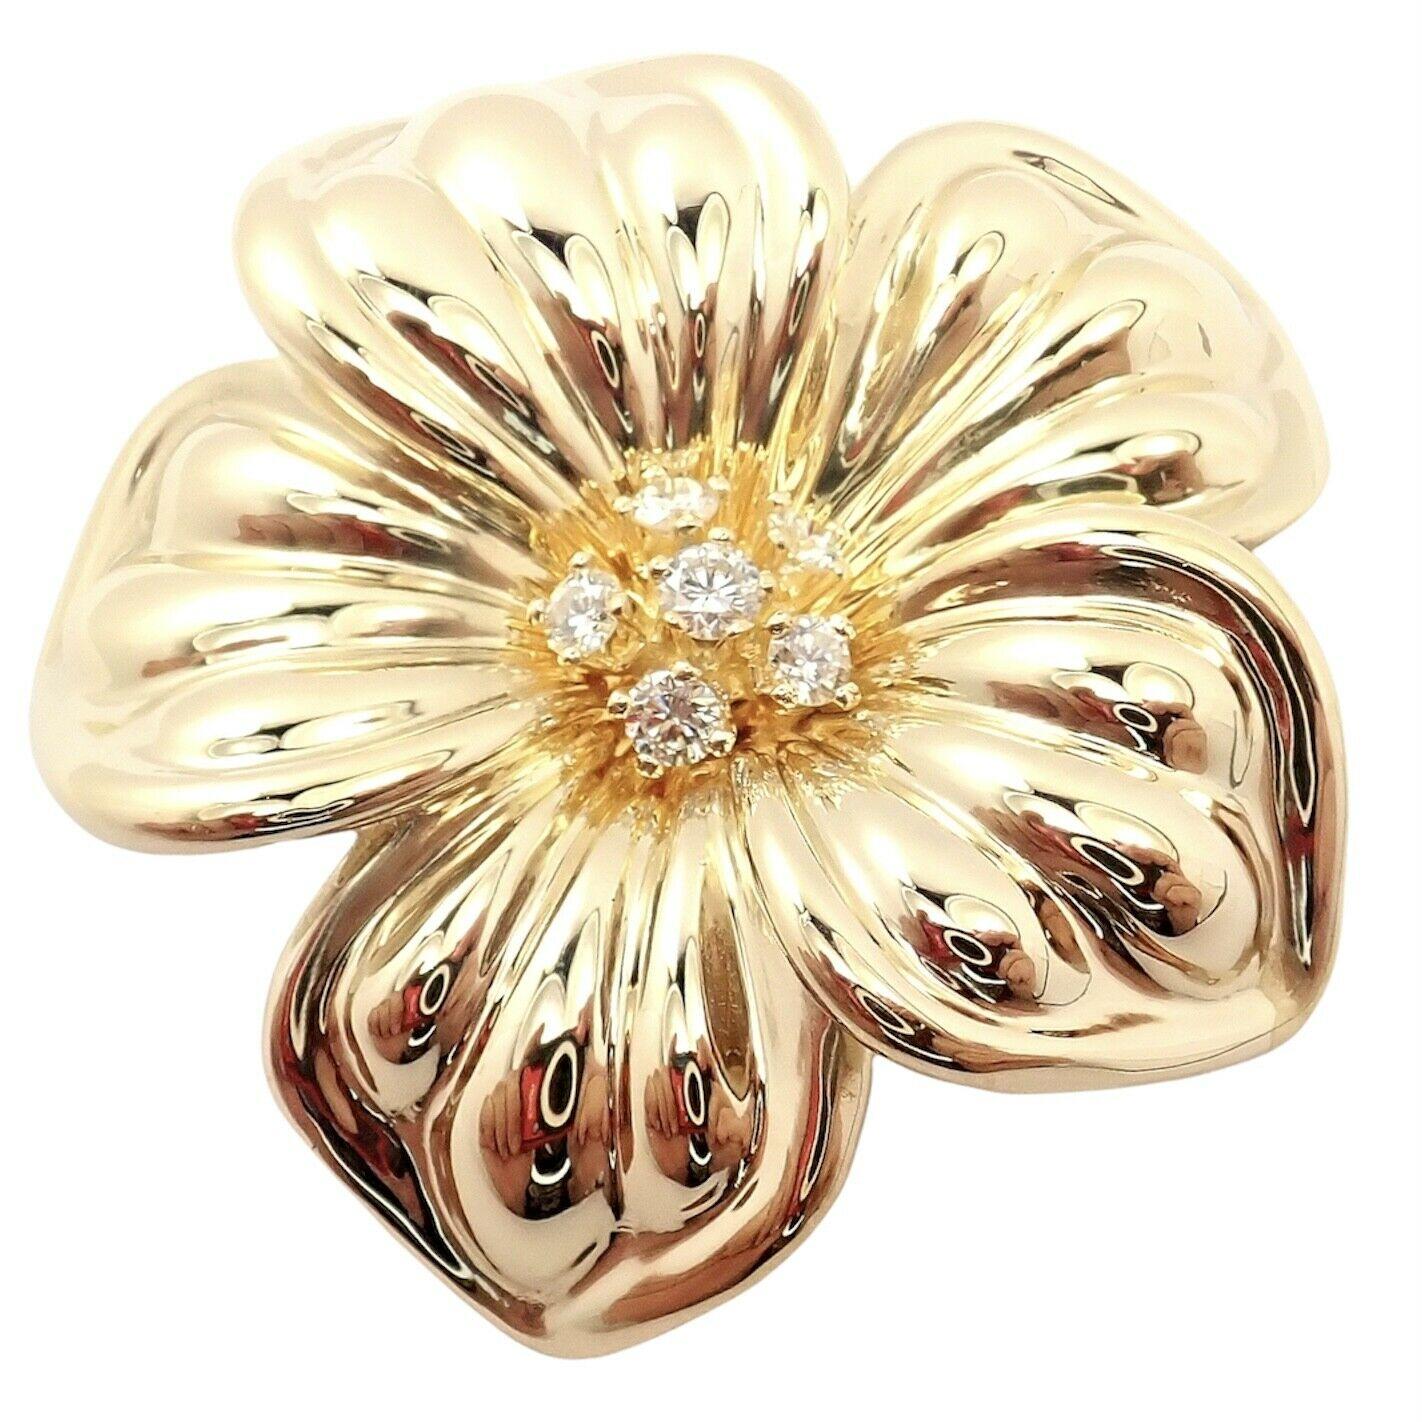 18k Yellow Gold Magnolia Flower Diamond Pin Brooch by Van Cleef & Arpels. 
With 6 round brilliant cut diamonds VVS1 clarity, E color total weight approx. .49ctw
This brooch comes with Van Cleef & Arpels service paper.
Details: 
Measurements: 40mm x